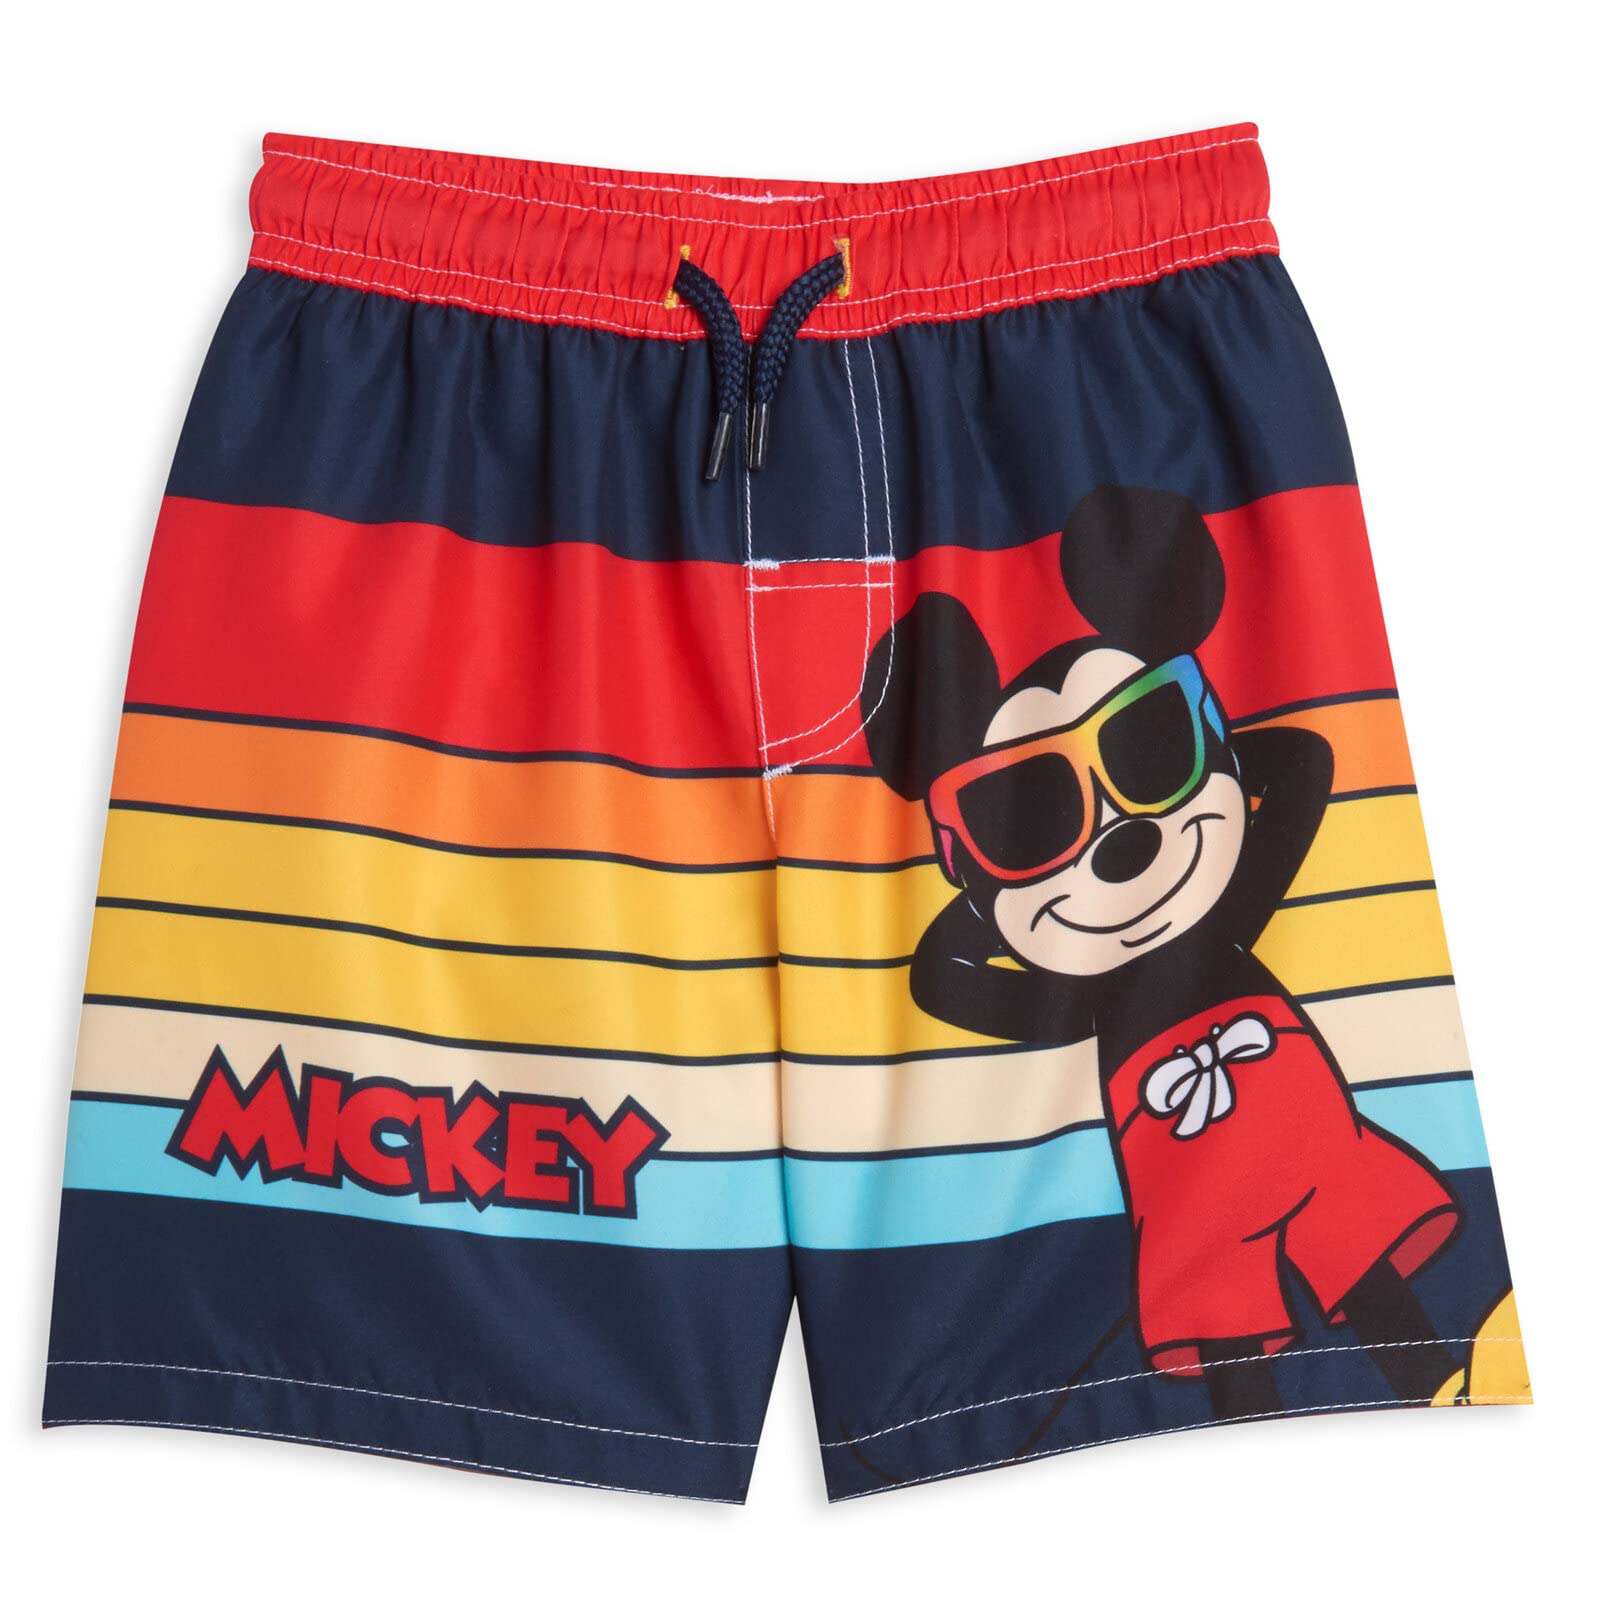 Disney Mickey Mouse Rash Guard and Swim Trunks Outfit Set Infant to Toddler